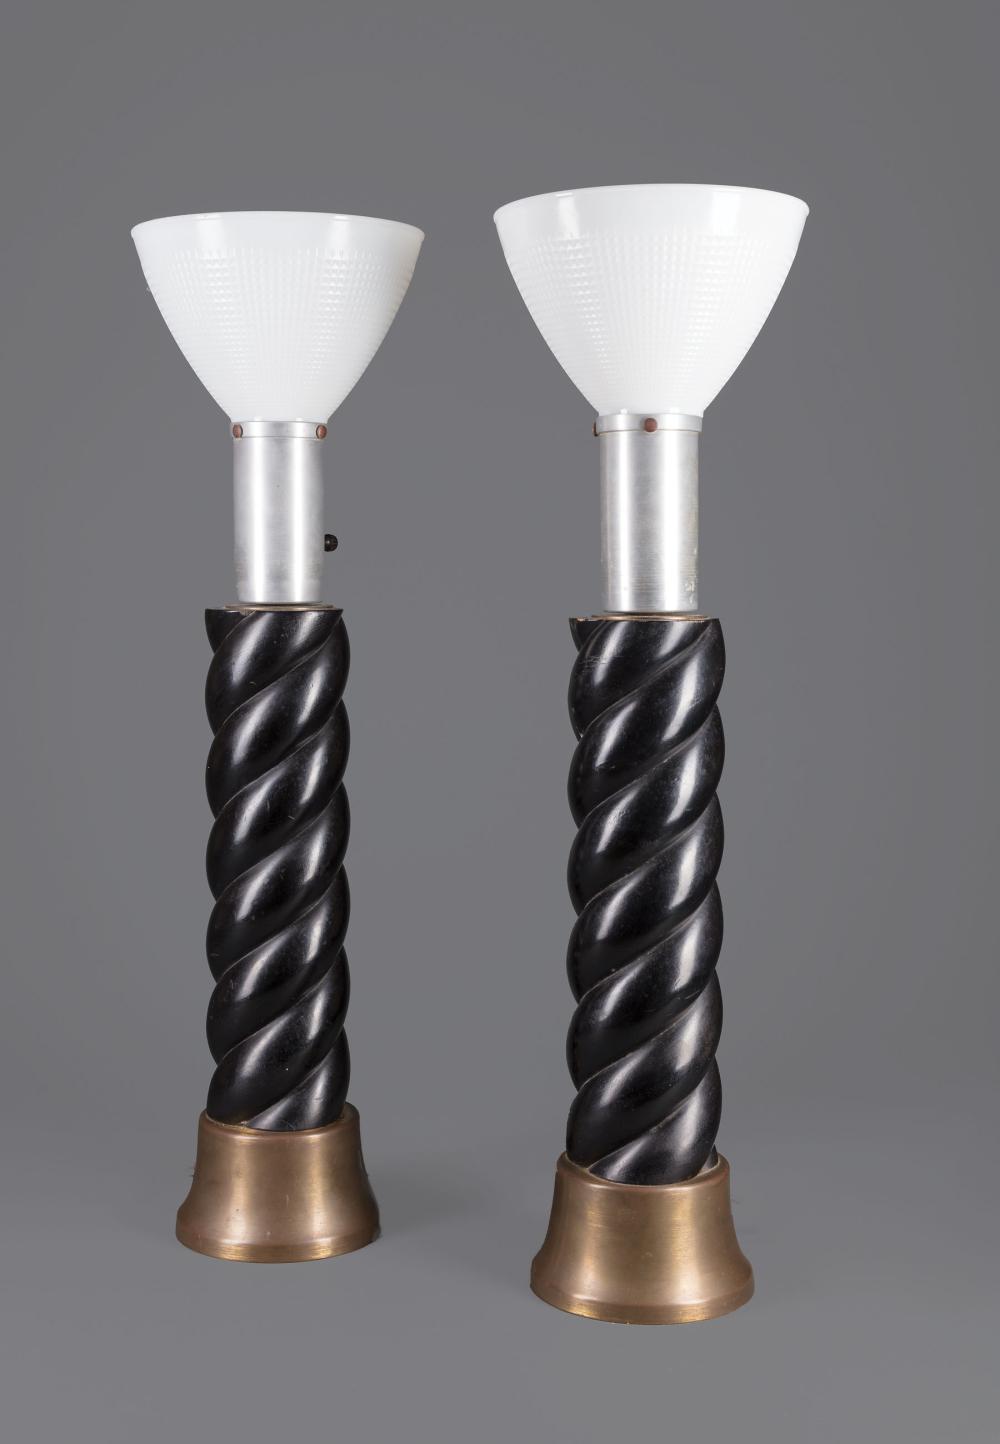 WOOD BRASS AND ALUMINUM LAMPS  31cefb